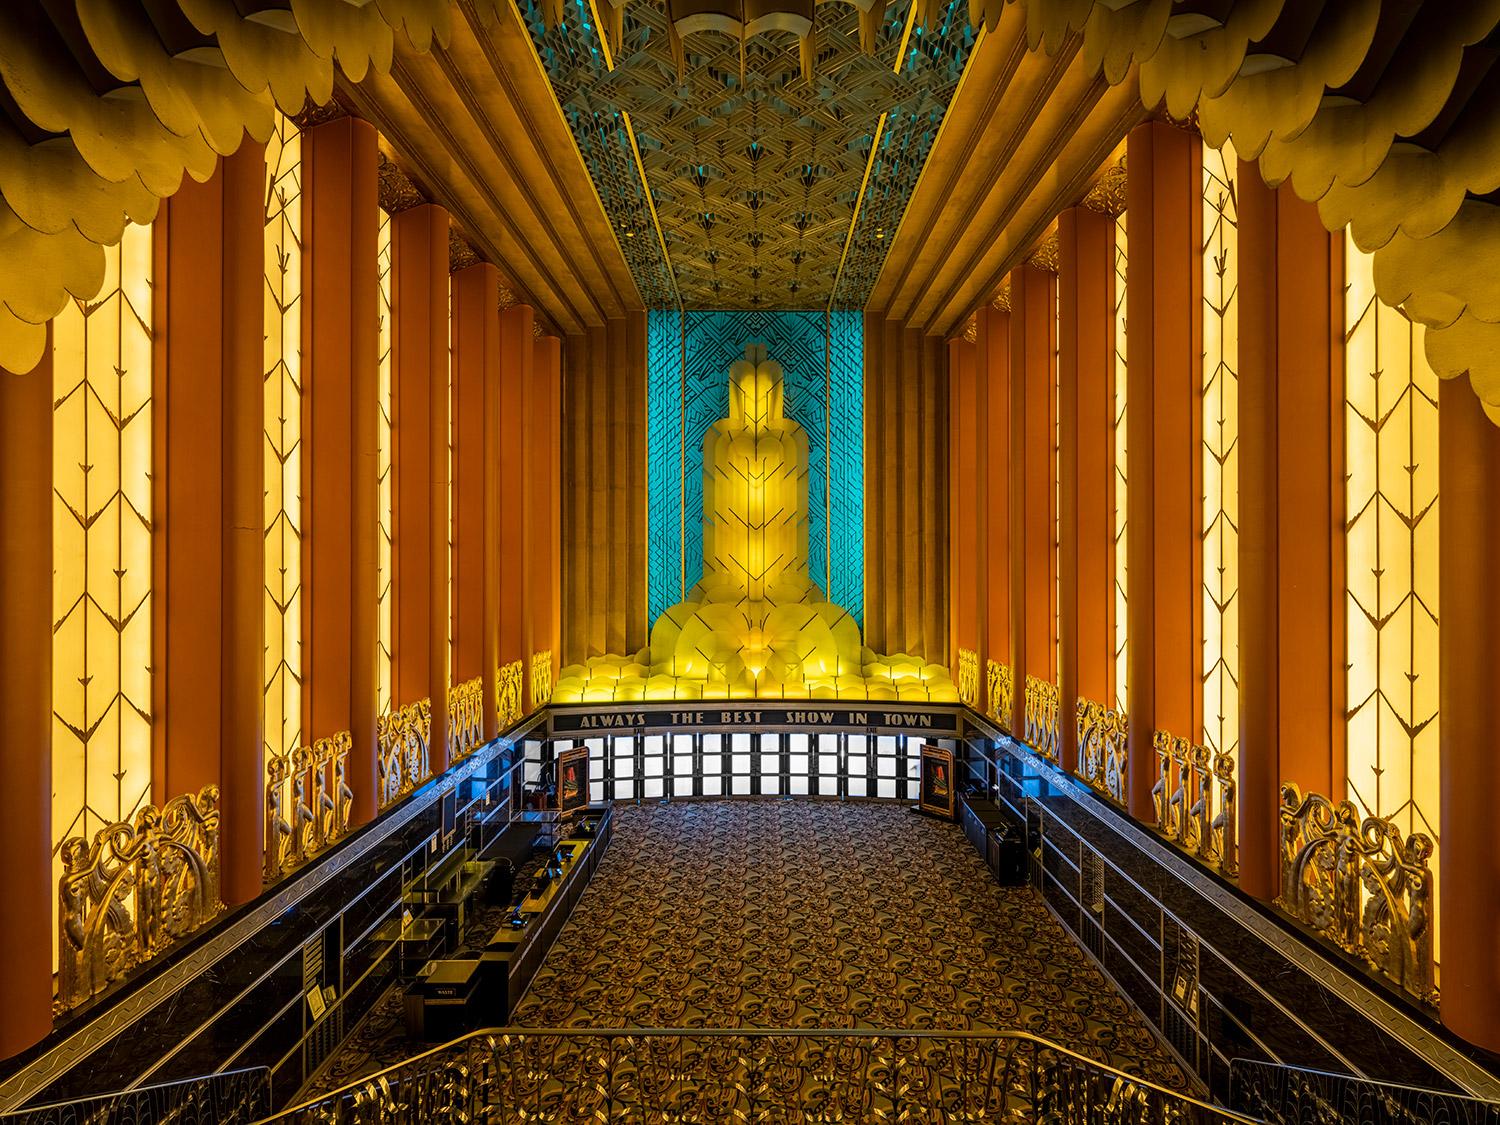 Originally named "The Met" (Metropolitan Theatre), this movie-palace was designed in a Renaissance-Revival and Baroque style by architect Clarence Blackhall in 1925. 

Series: Architecture of Gilded Dreams
Archival Pigment Canson Platine Print	
All